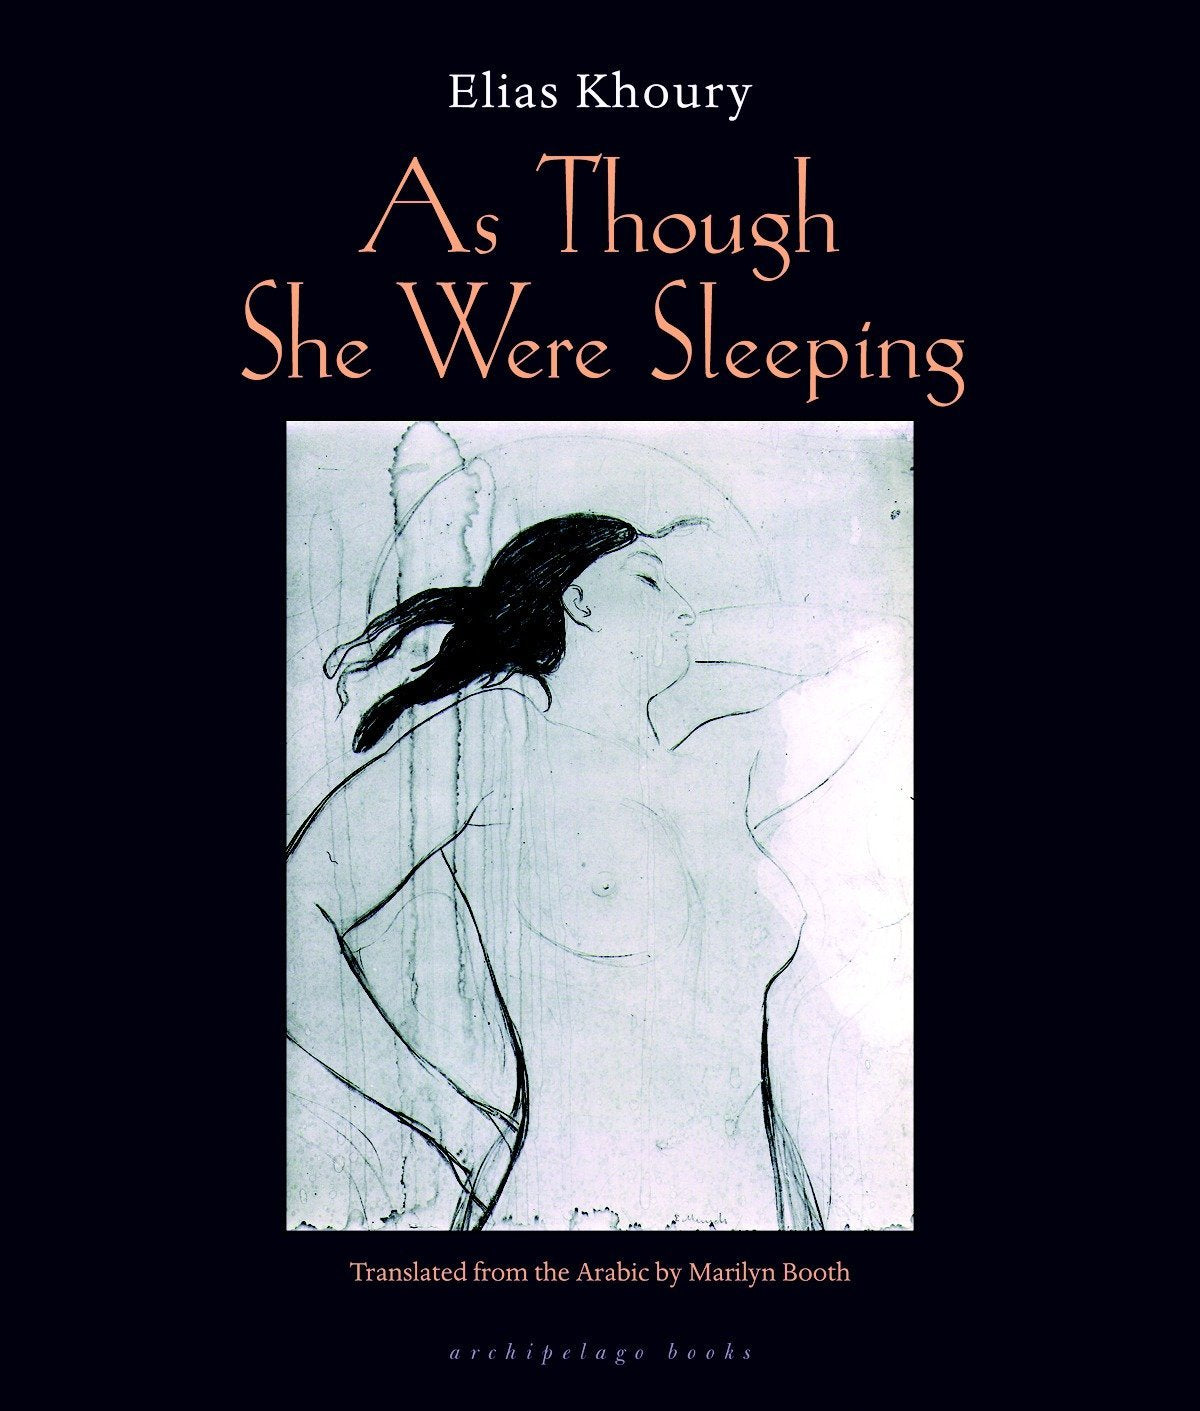 As Though She Were Sleeping, by Elias Khoury